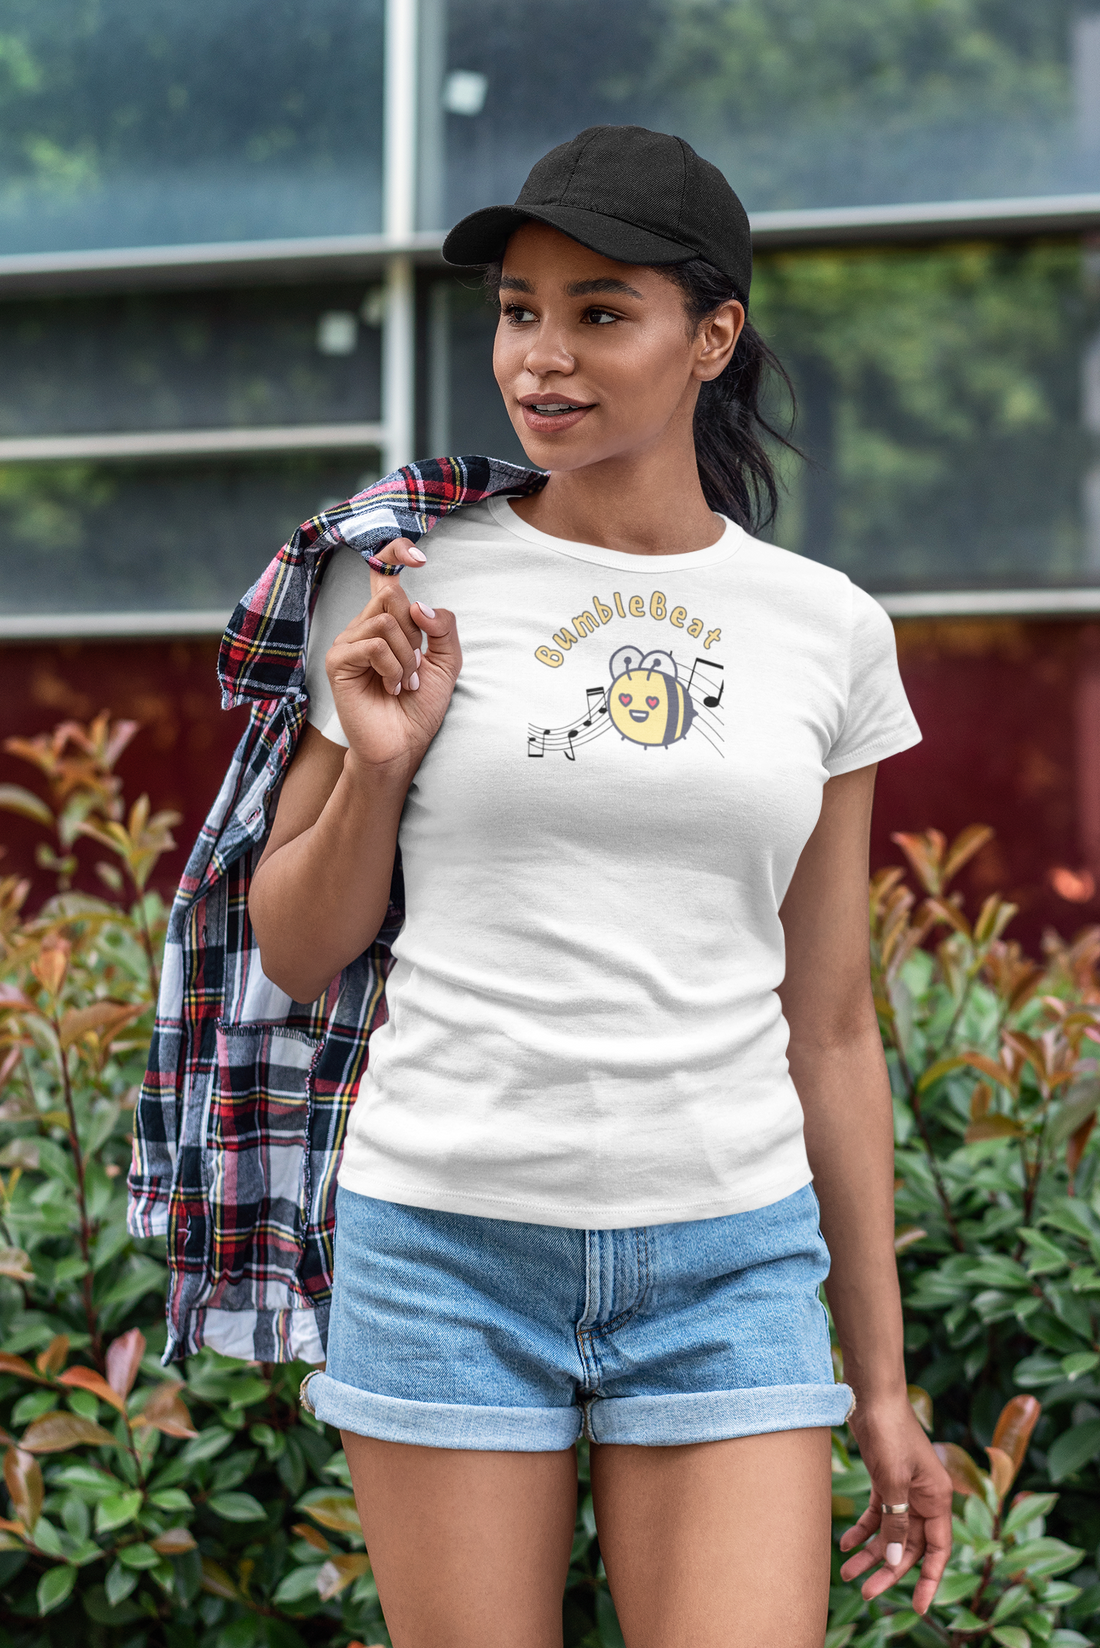 A female wearing a white T-shirt with the text "bumblebeat" and a bumblebee buzzing to music